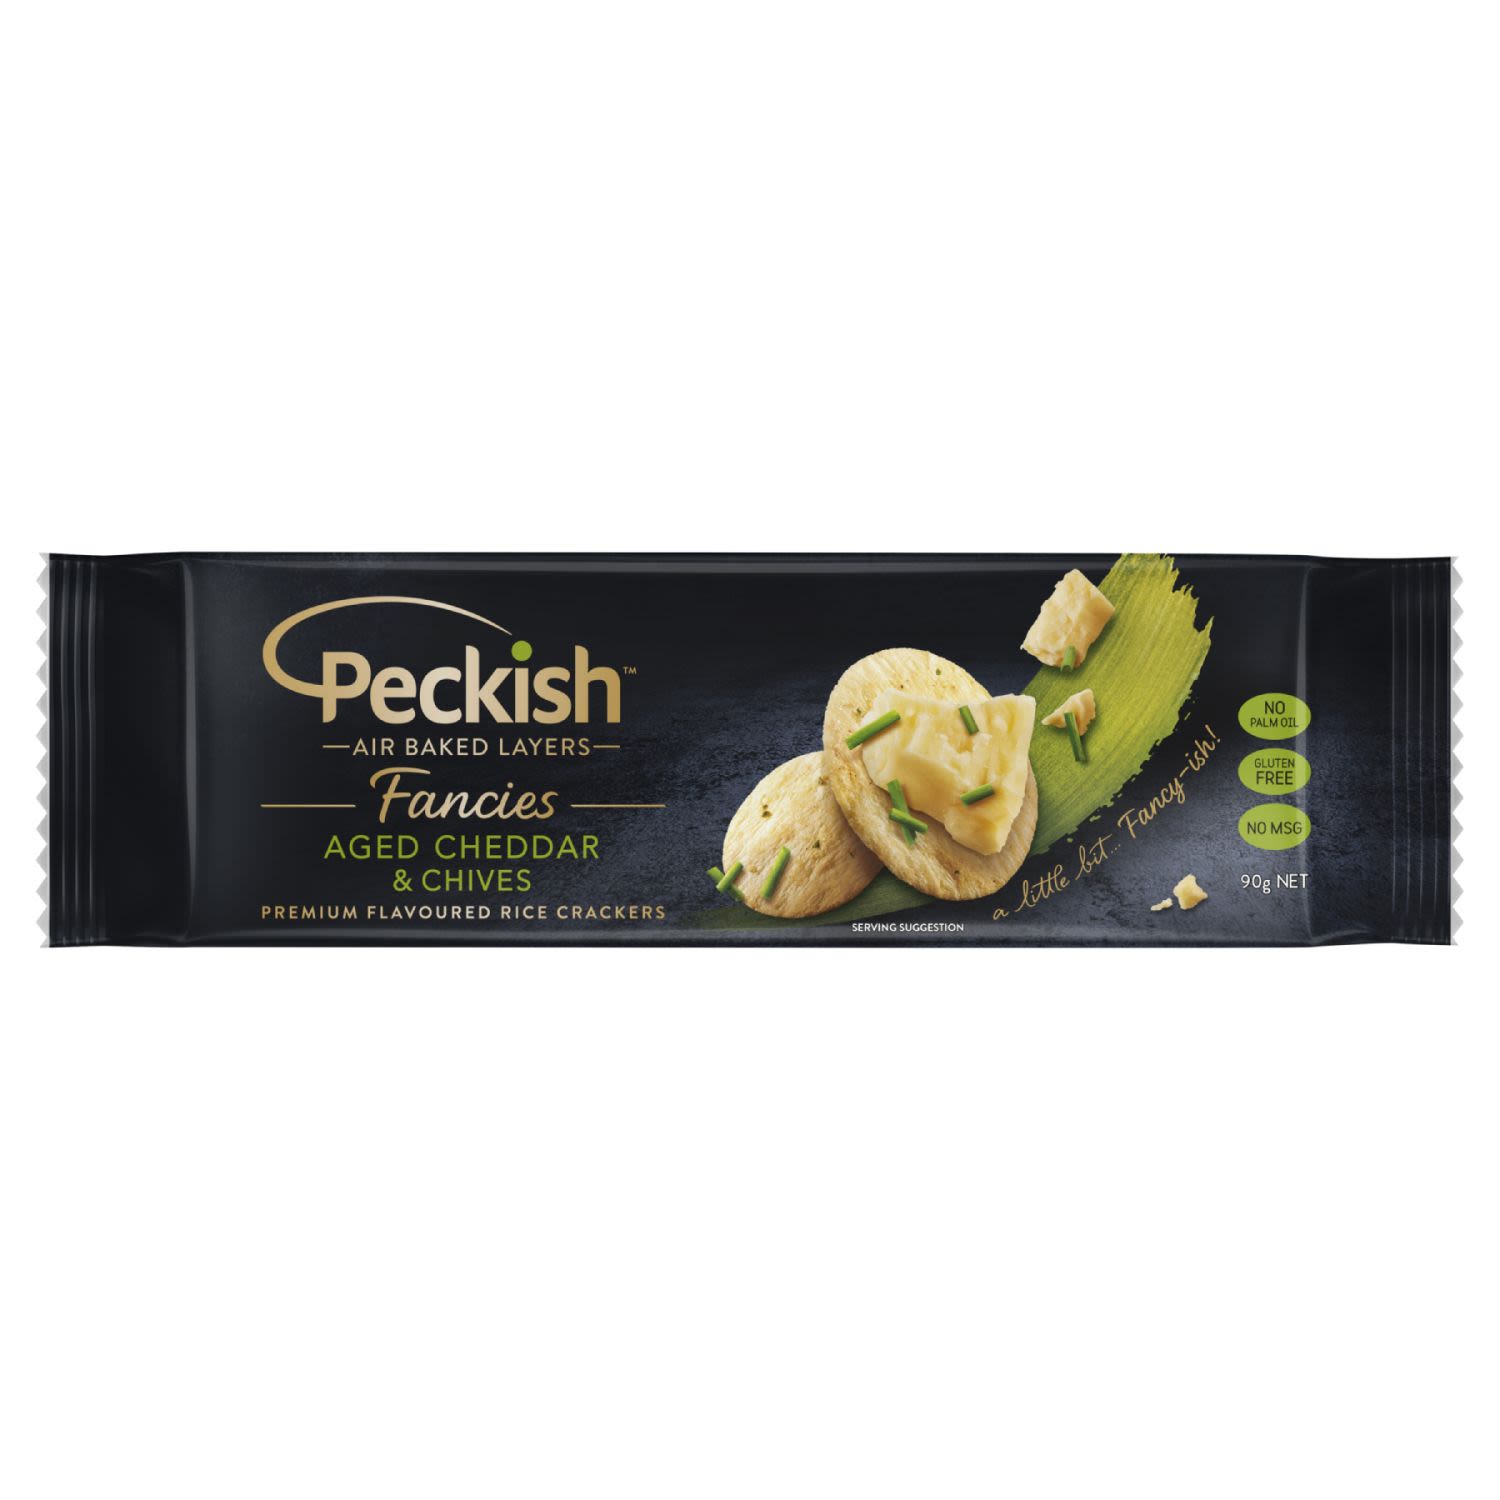 Peckish Fancies Aged Cheddar & Chive 90gm